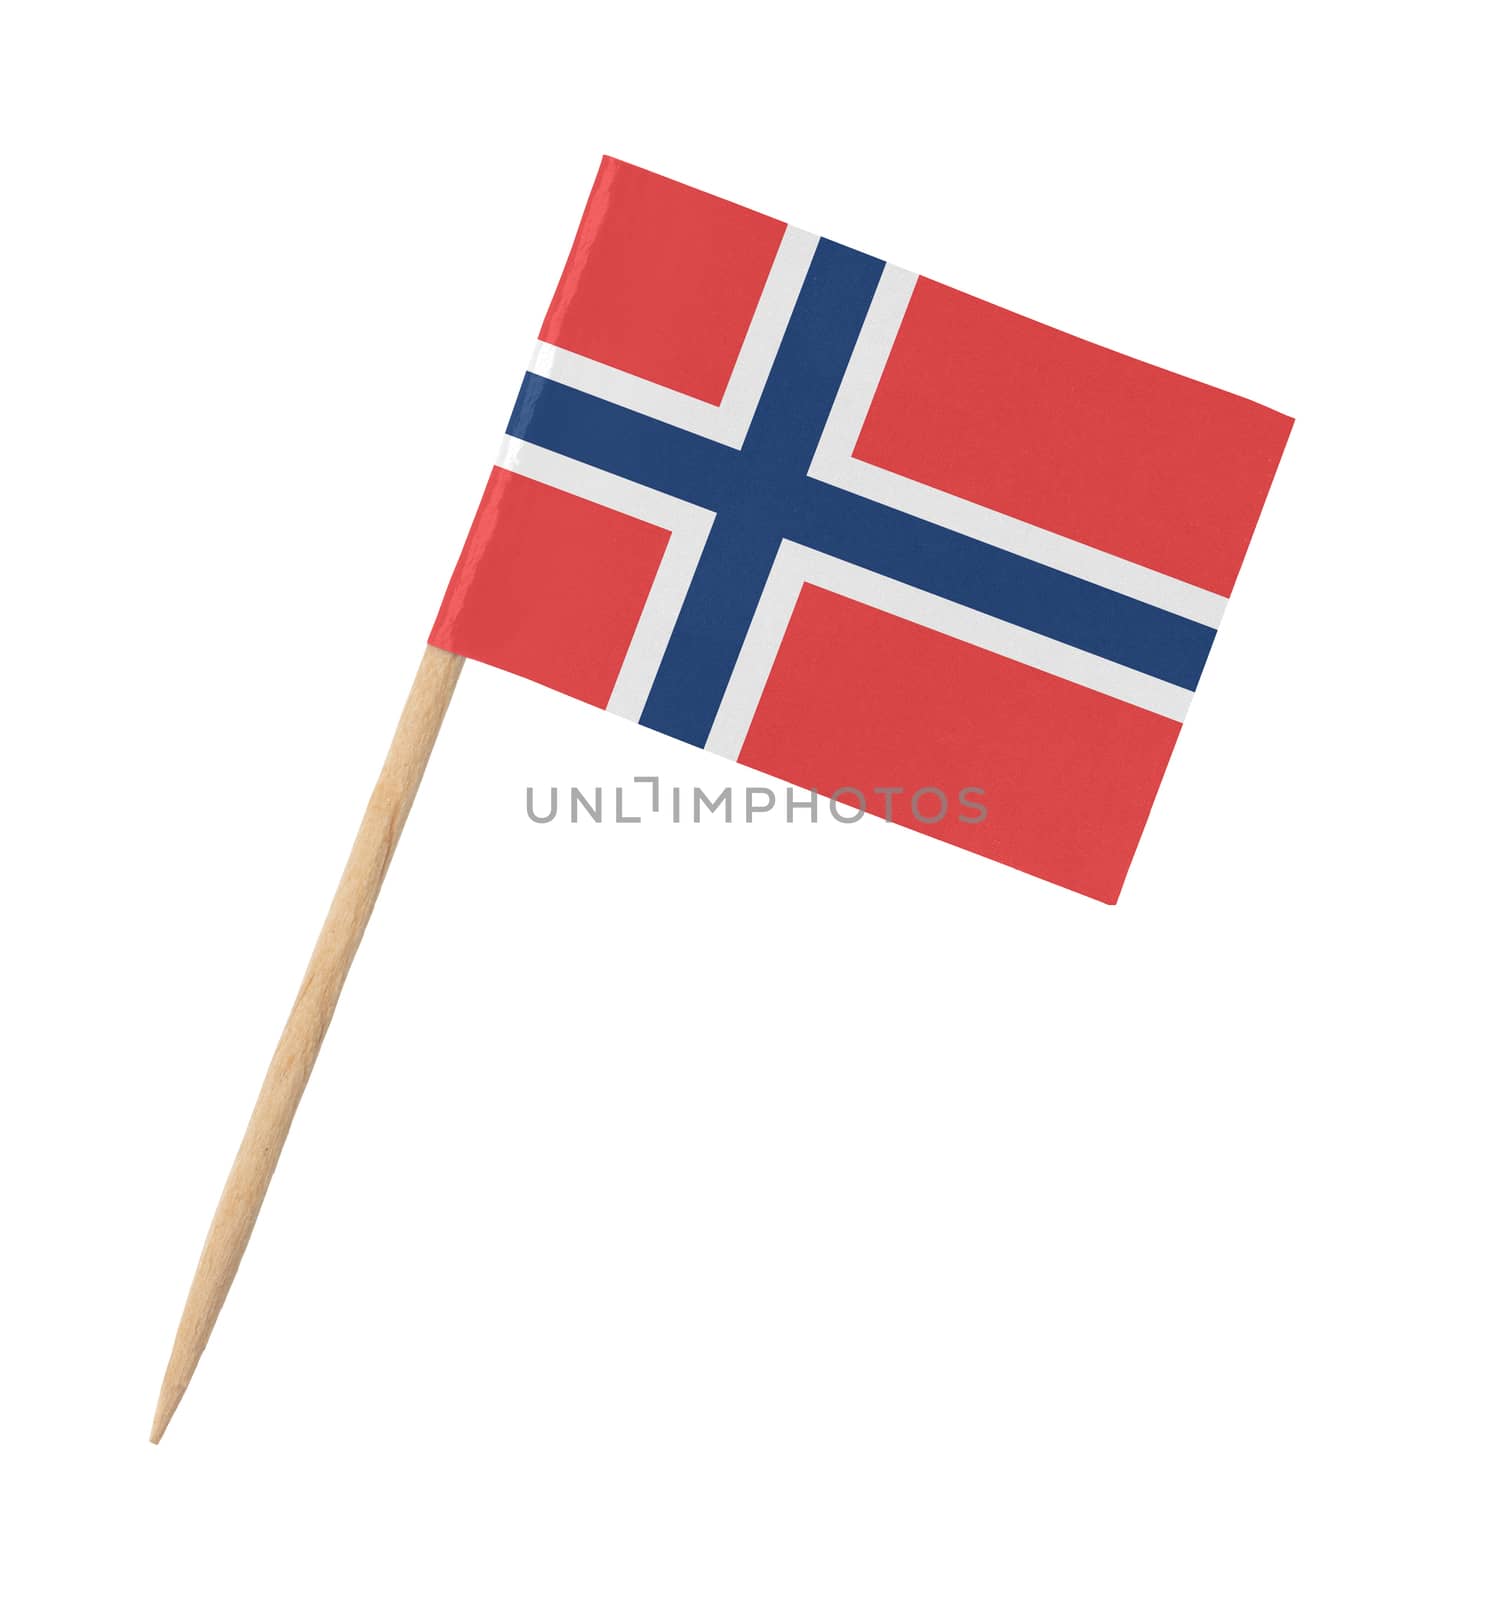 Small paper flag of Norway on wooden stick, isolated on white